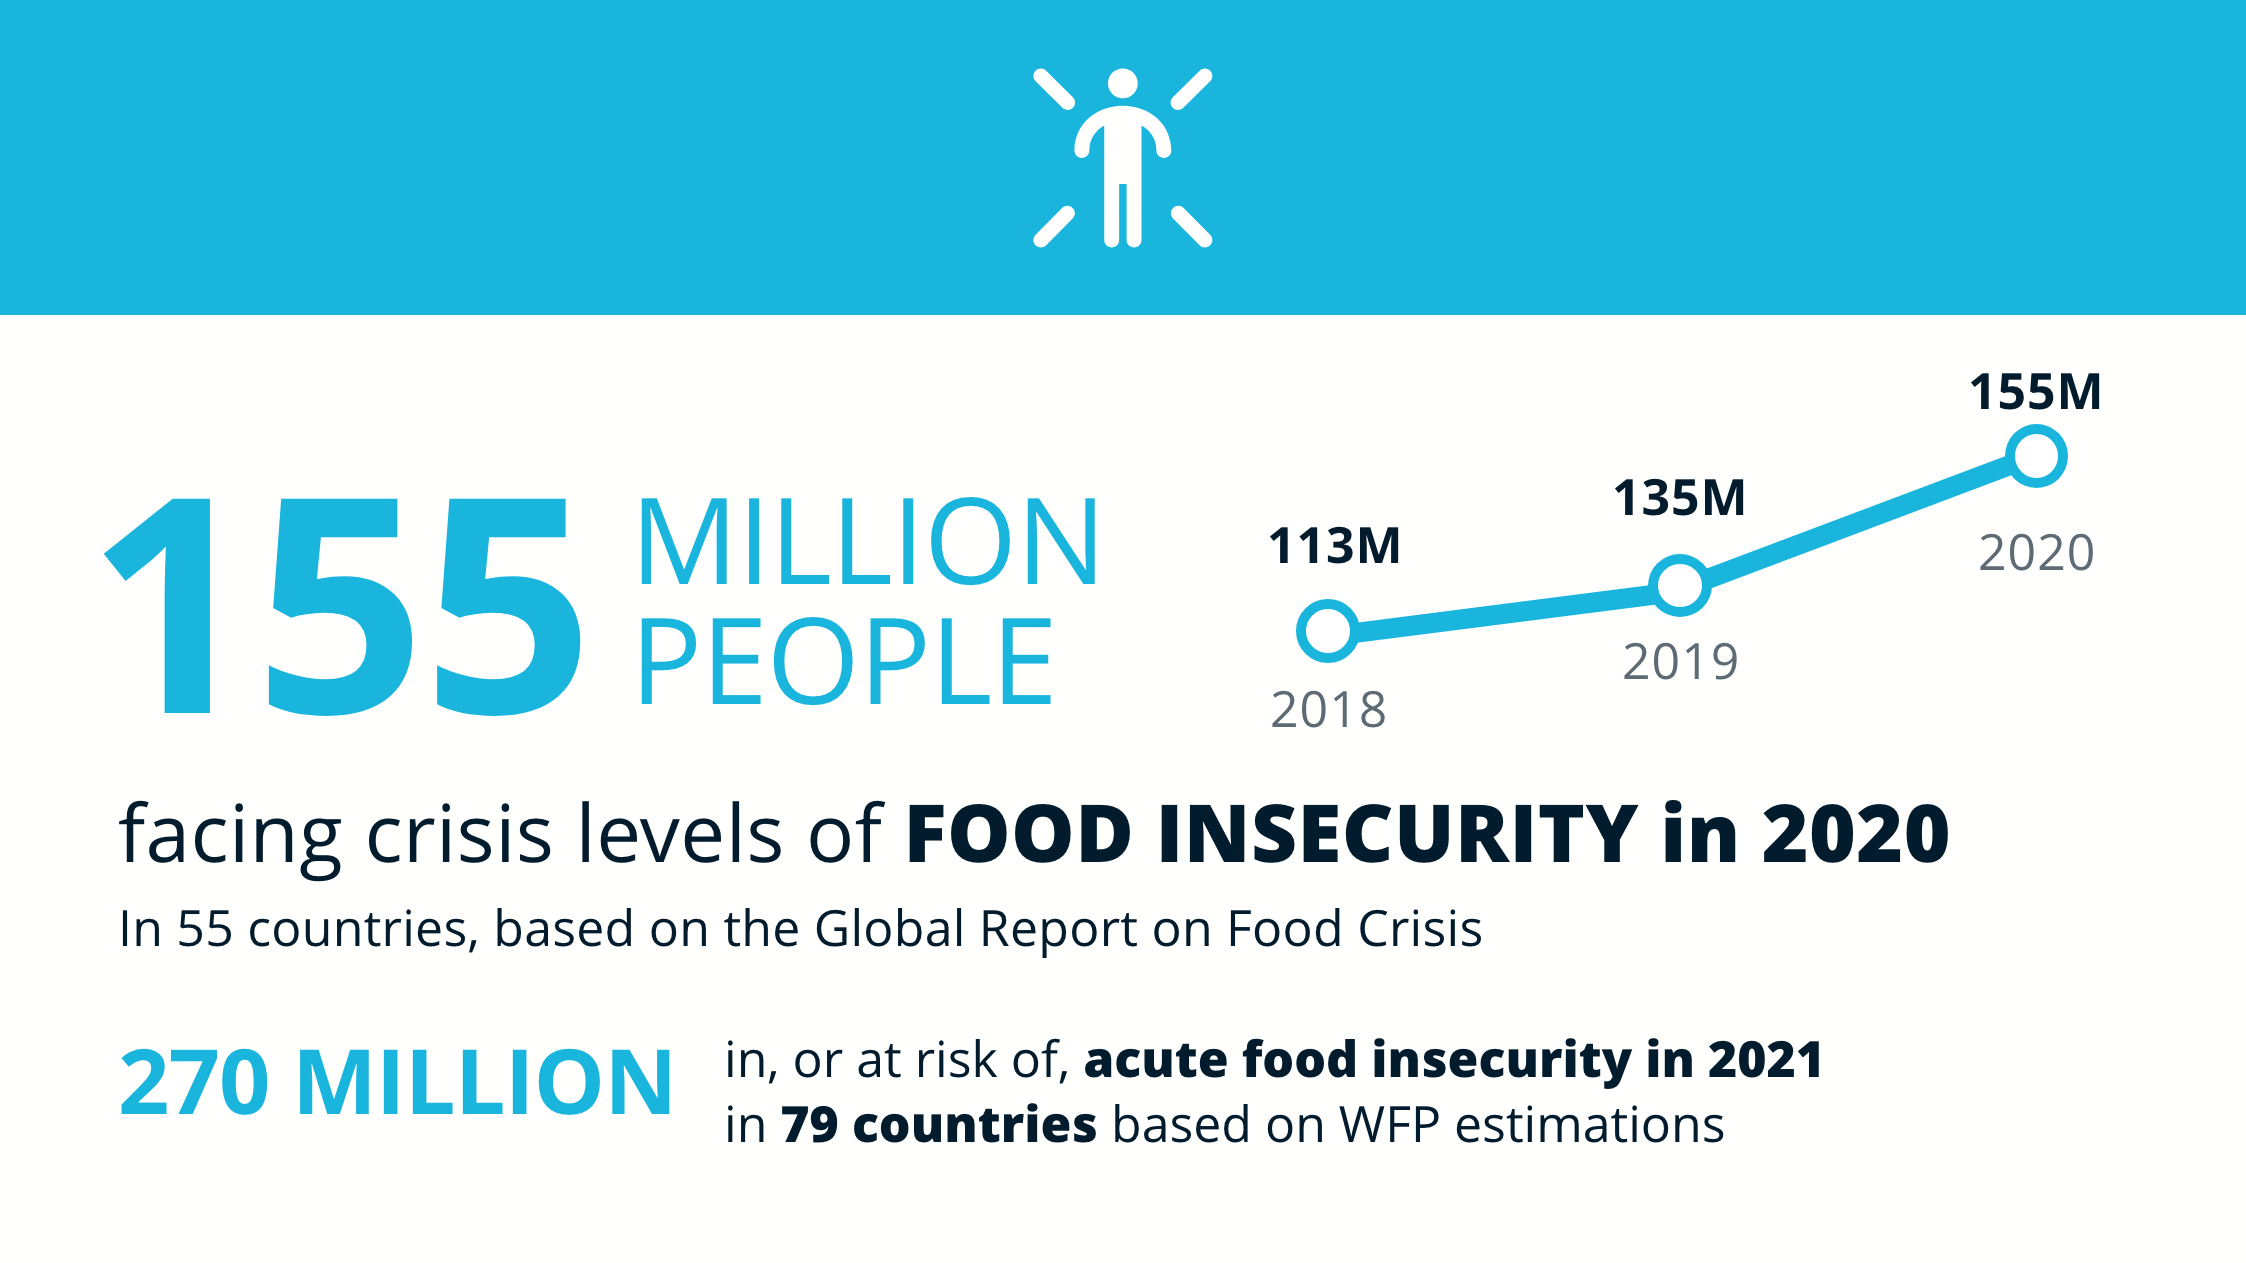 155 million people facing crisis levels of food insecurity in 2020